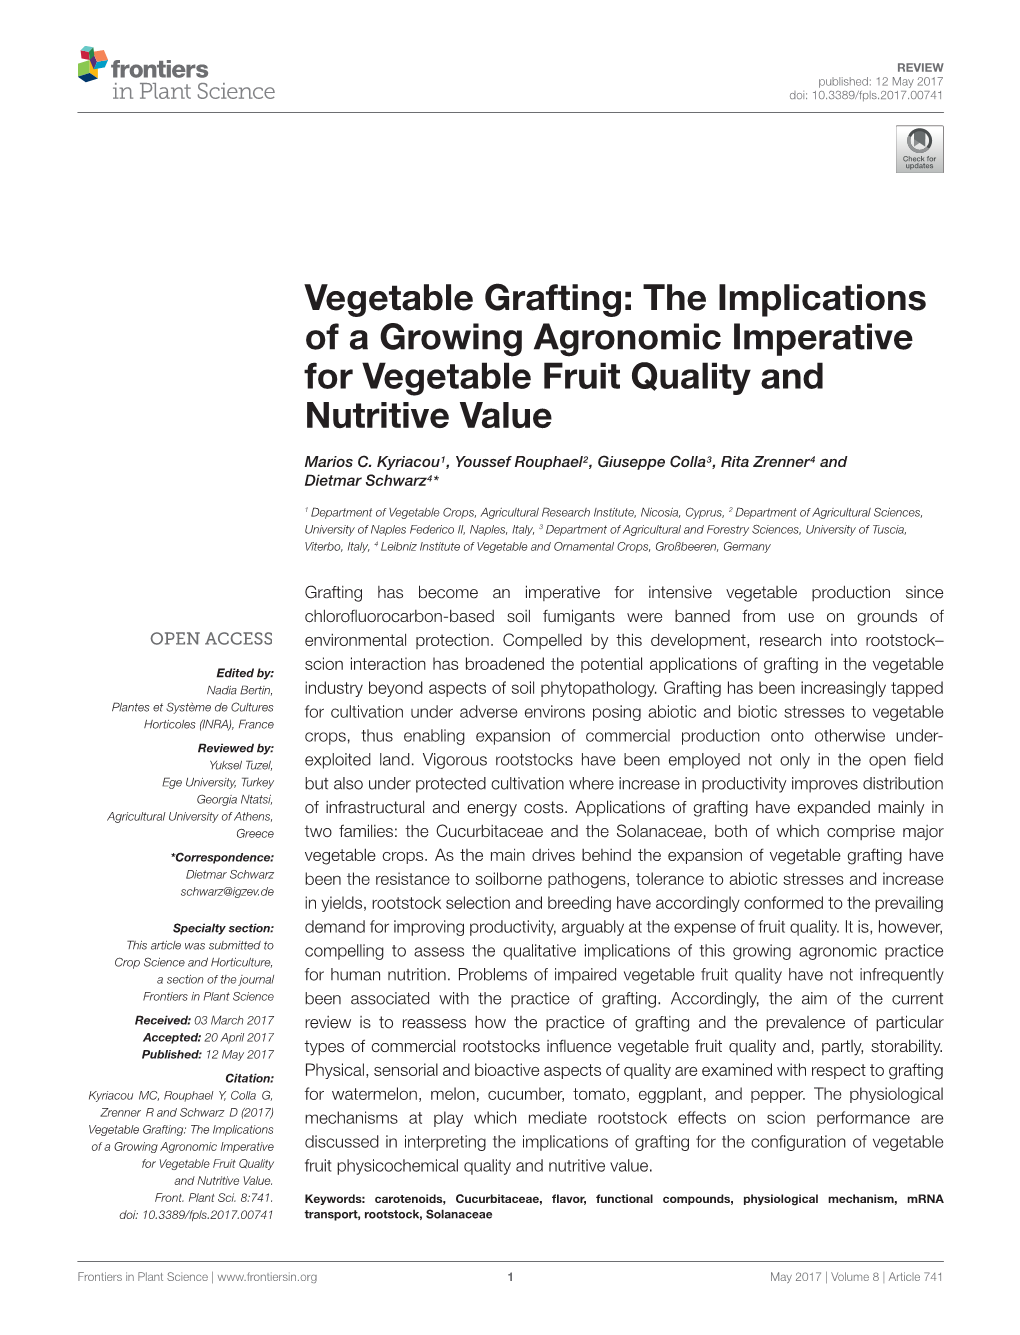 The Implications of a Growing Agronomic Imperative for Vegetable Fruit Quality and Nutritive Value